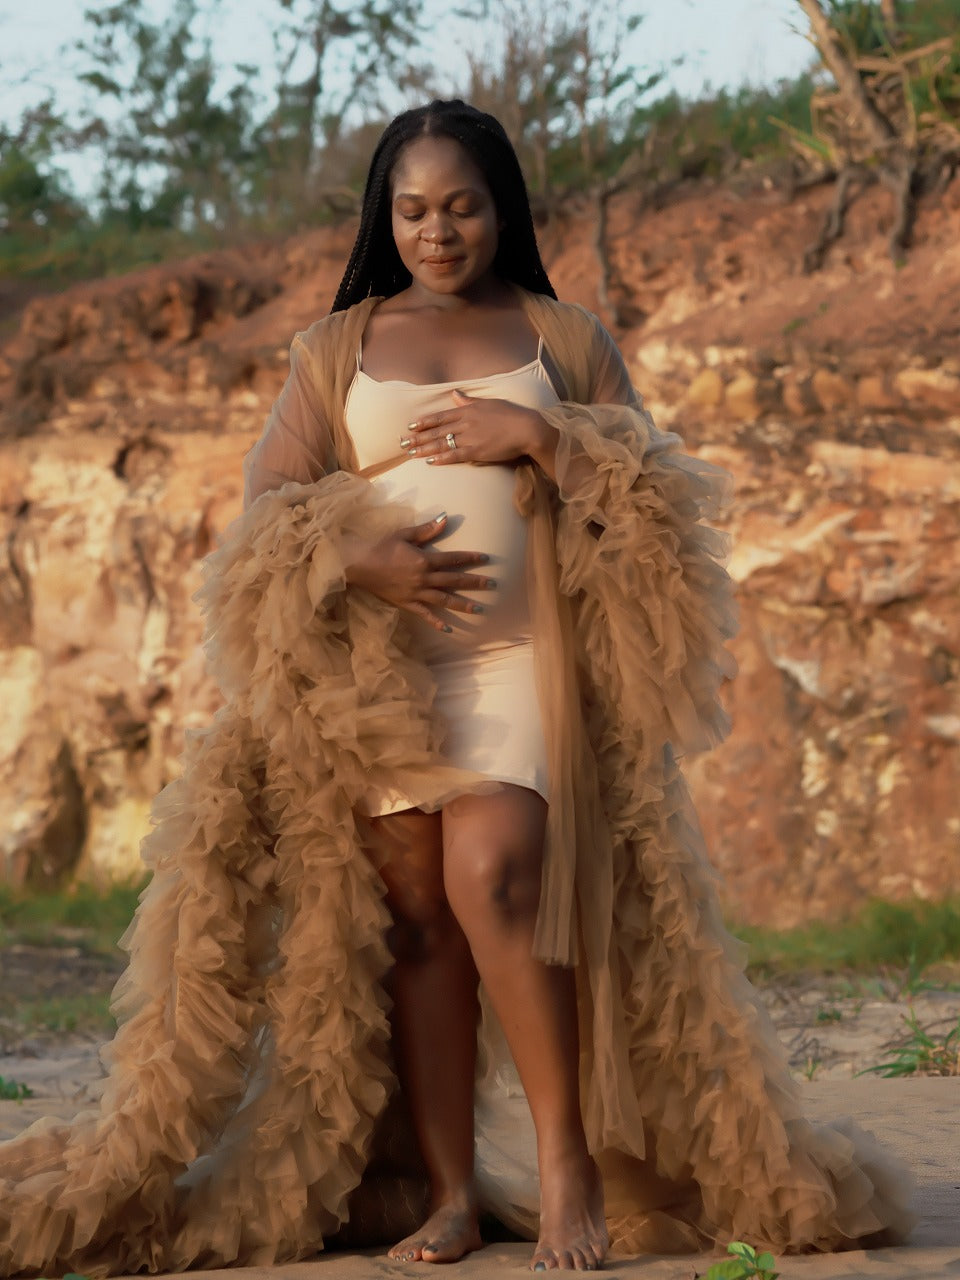 Tulle Robe Hire - Maternity Photoshoot Dresses - Sophie - Light Brown Tulle Robe - RENTAL